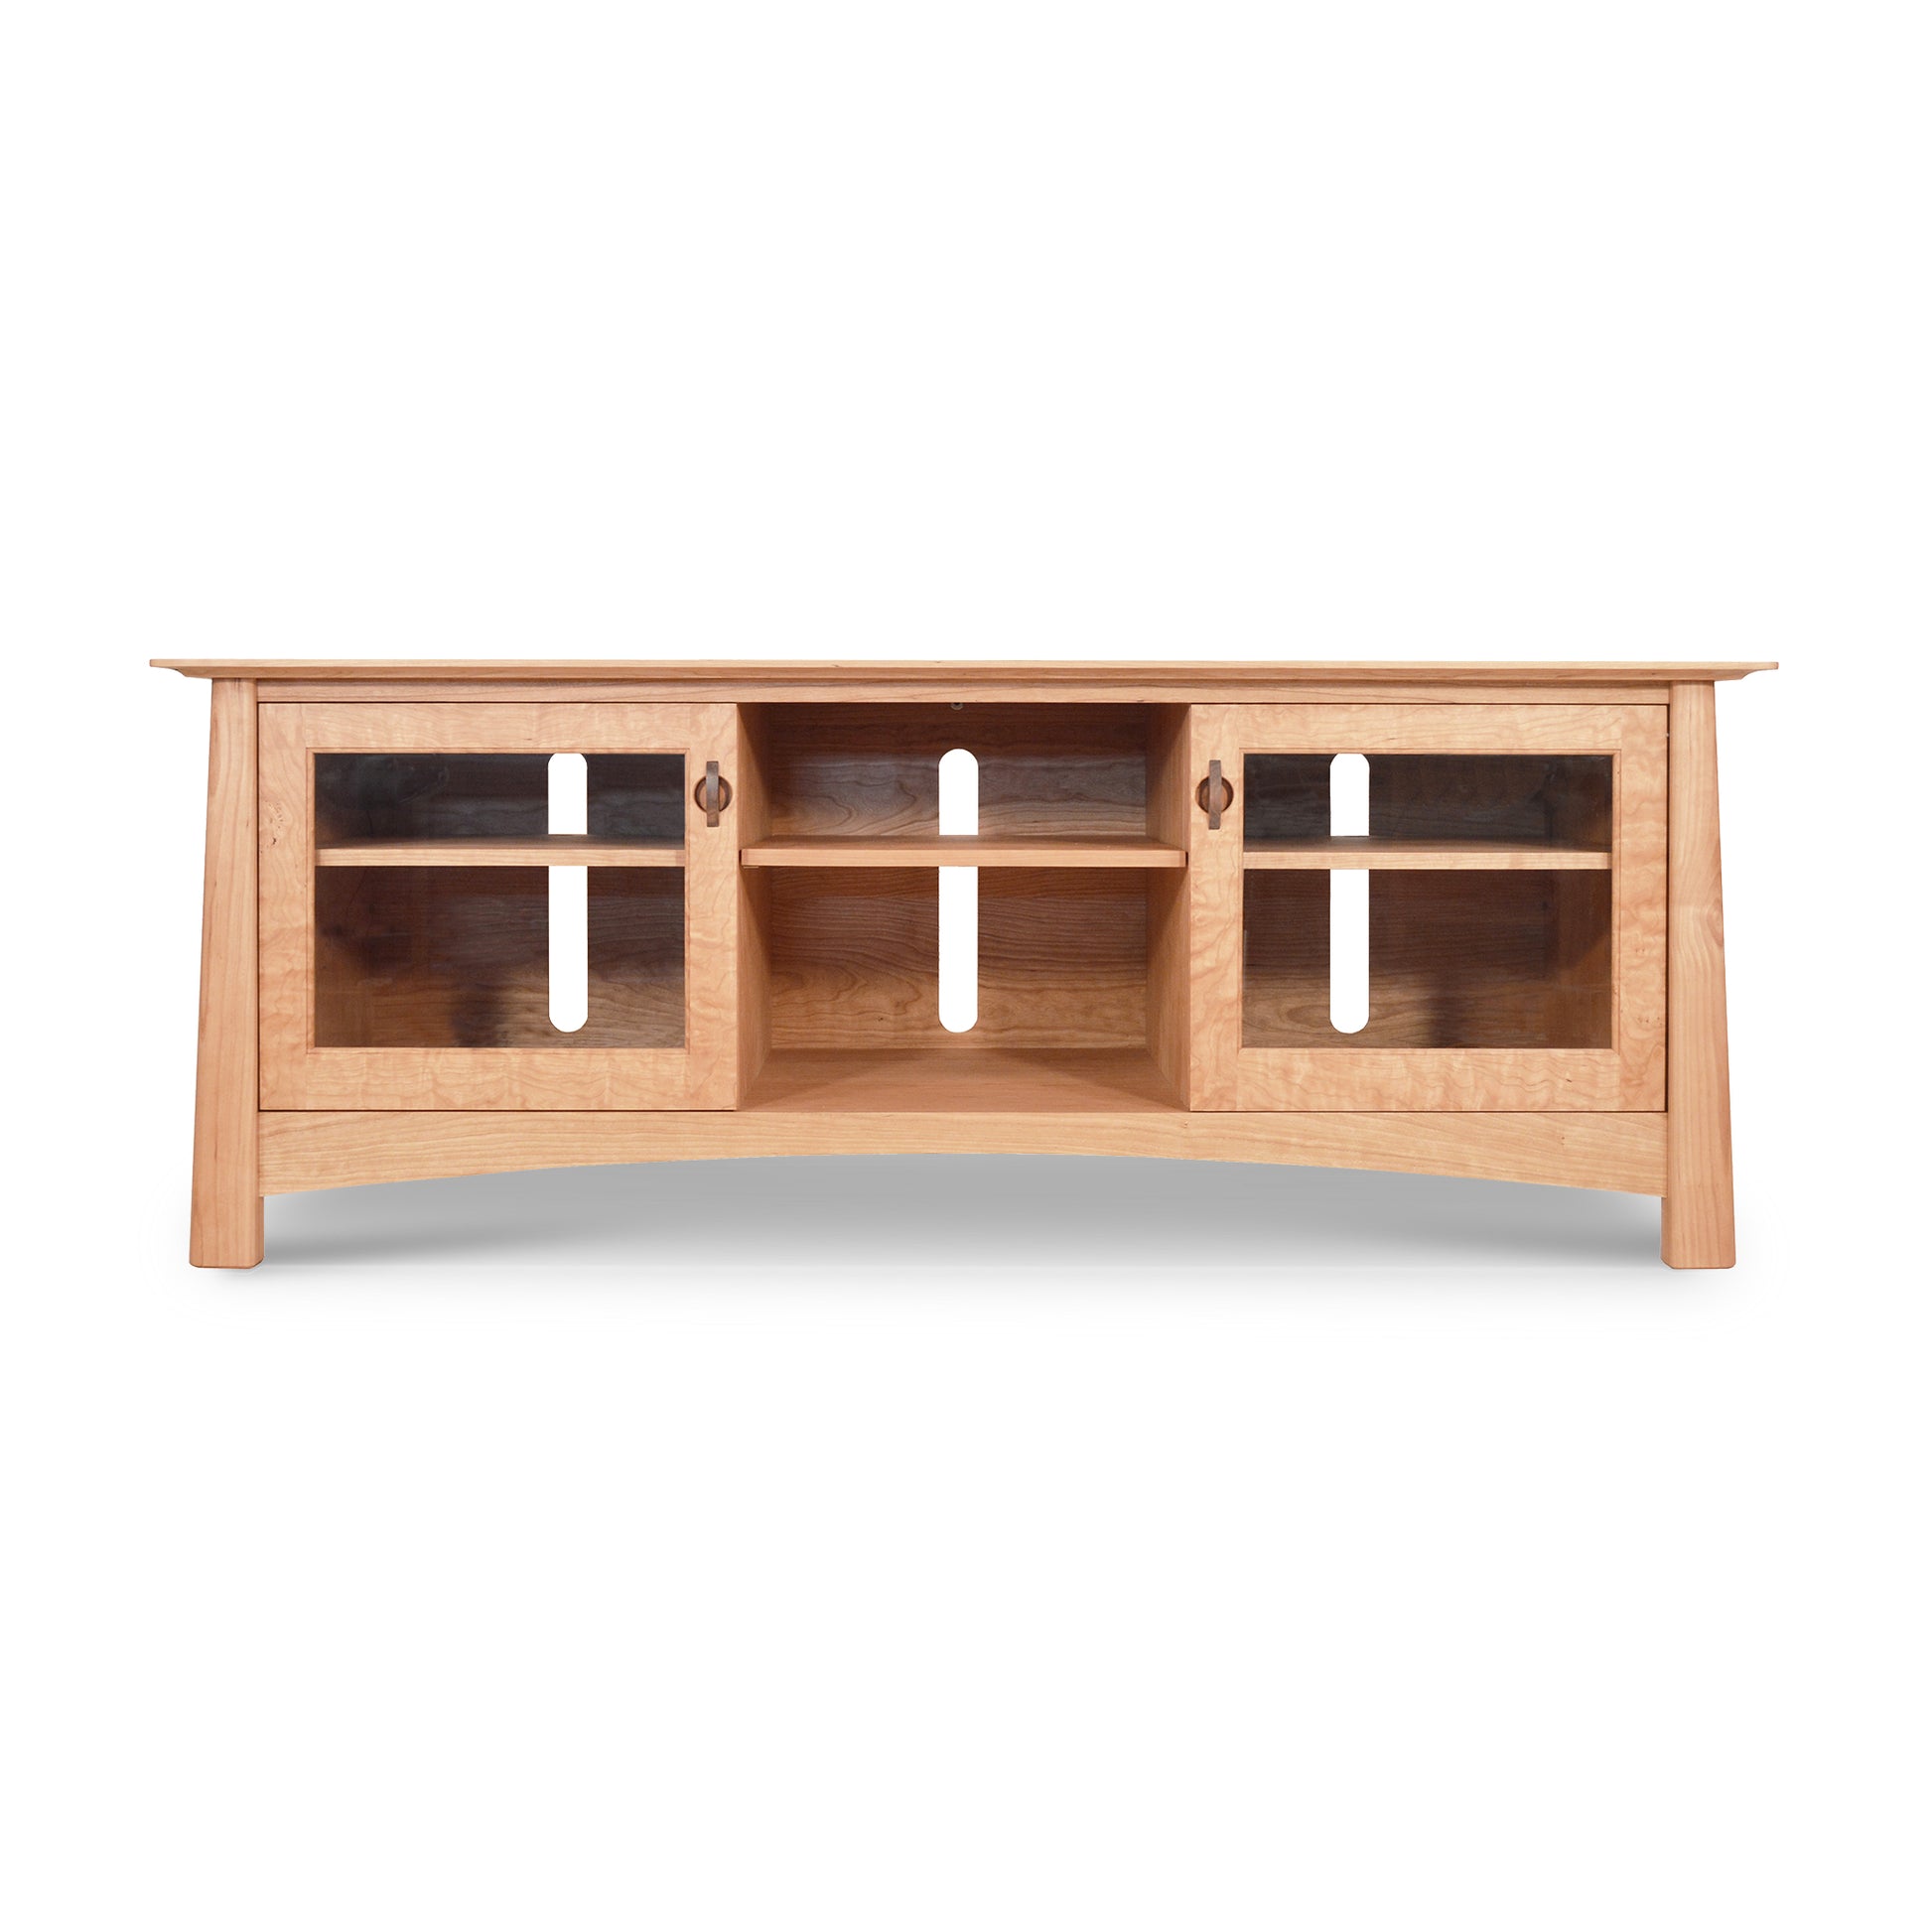 The Cherry Moon 68" TV Console, a large wooden tv stand crafted from hardwood, featuring glass doors by Maple Corner Woodworks.